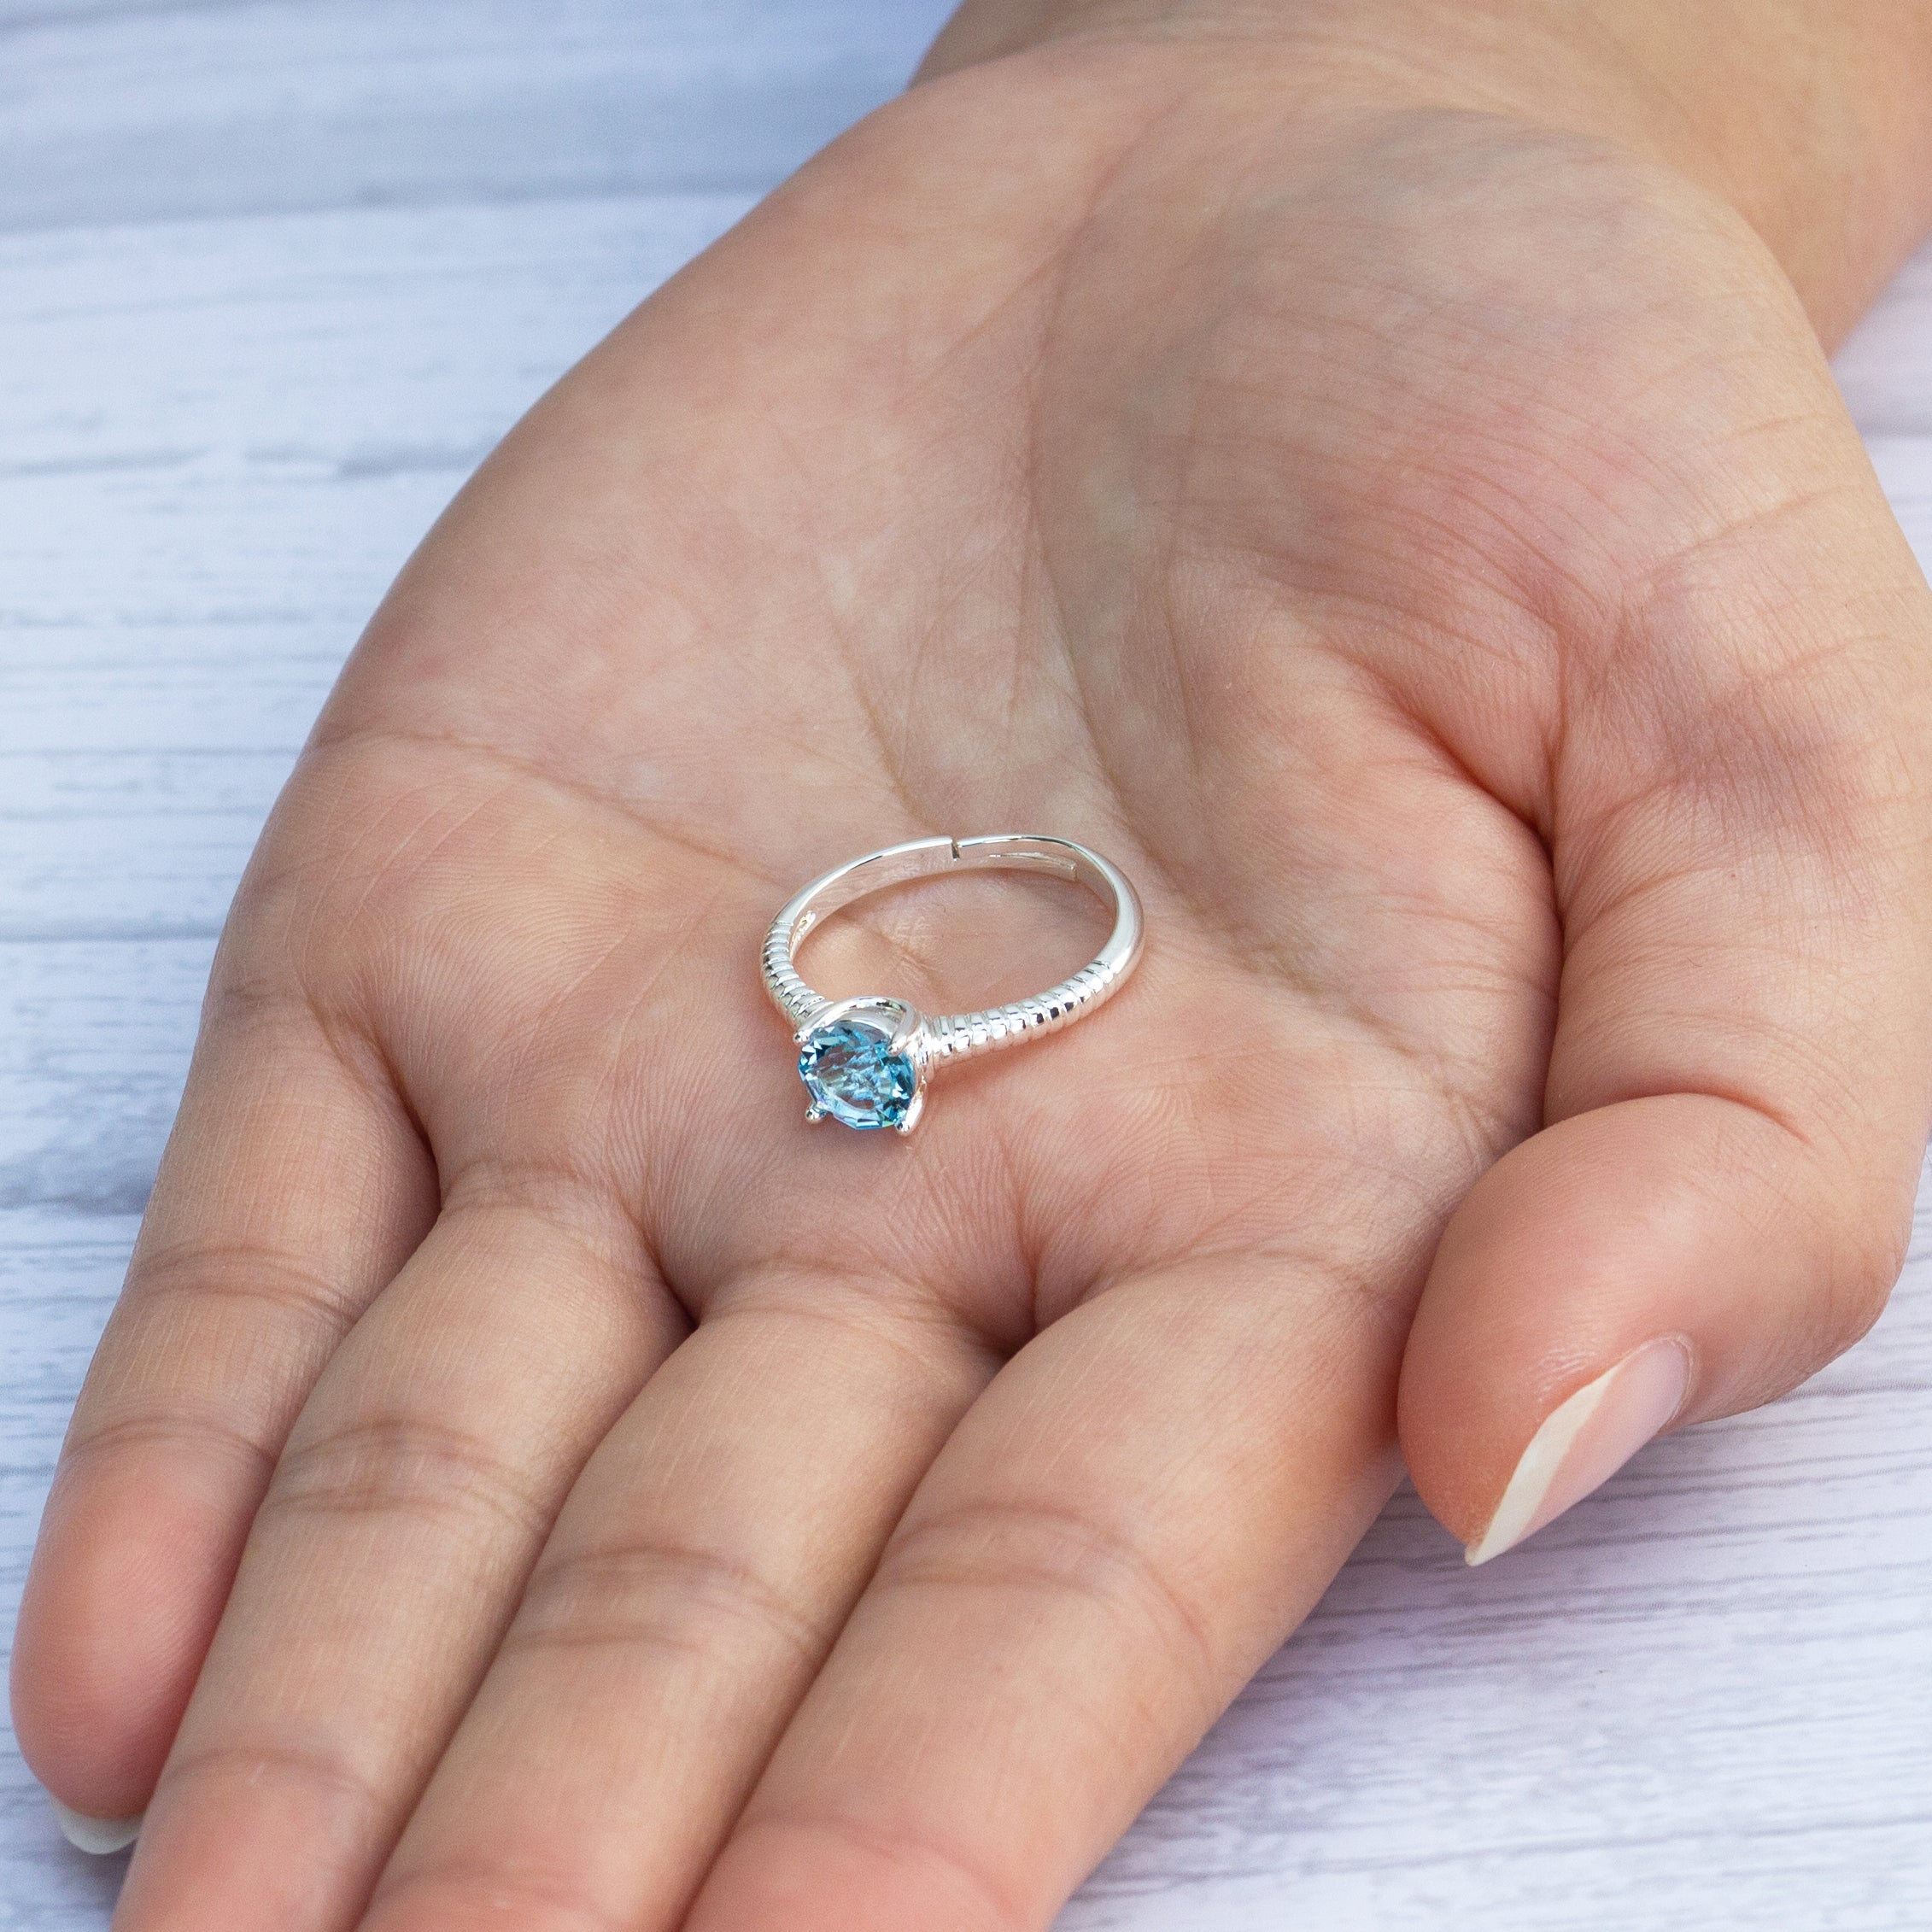 Light Blue Adjustable Crystal Ring Created with Zircondia® Crystals